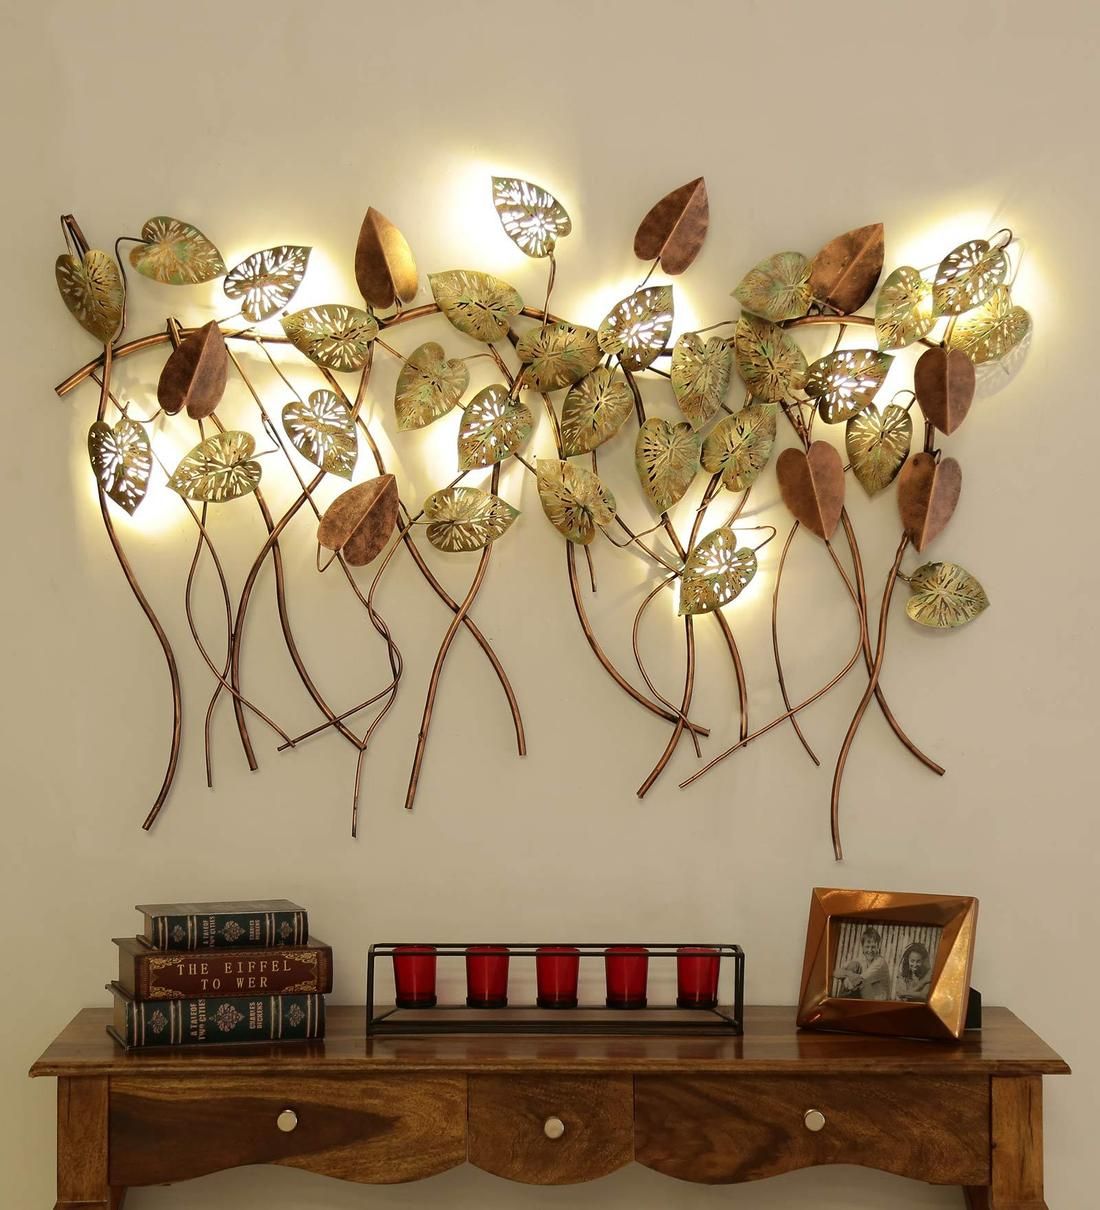 Buy Wrought Iron Hanging Leaf In Golden With Led Wall Artmalik For Recent Gold Leaves Wall Art (View 3 of 20)